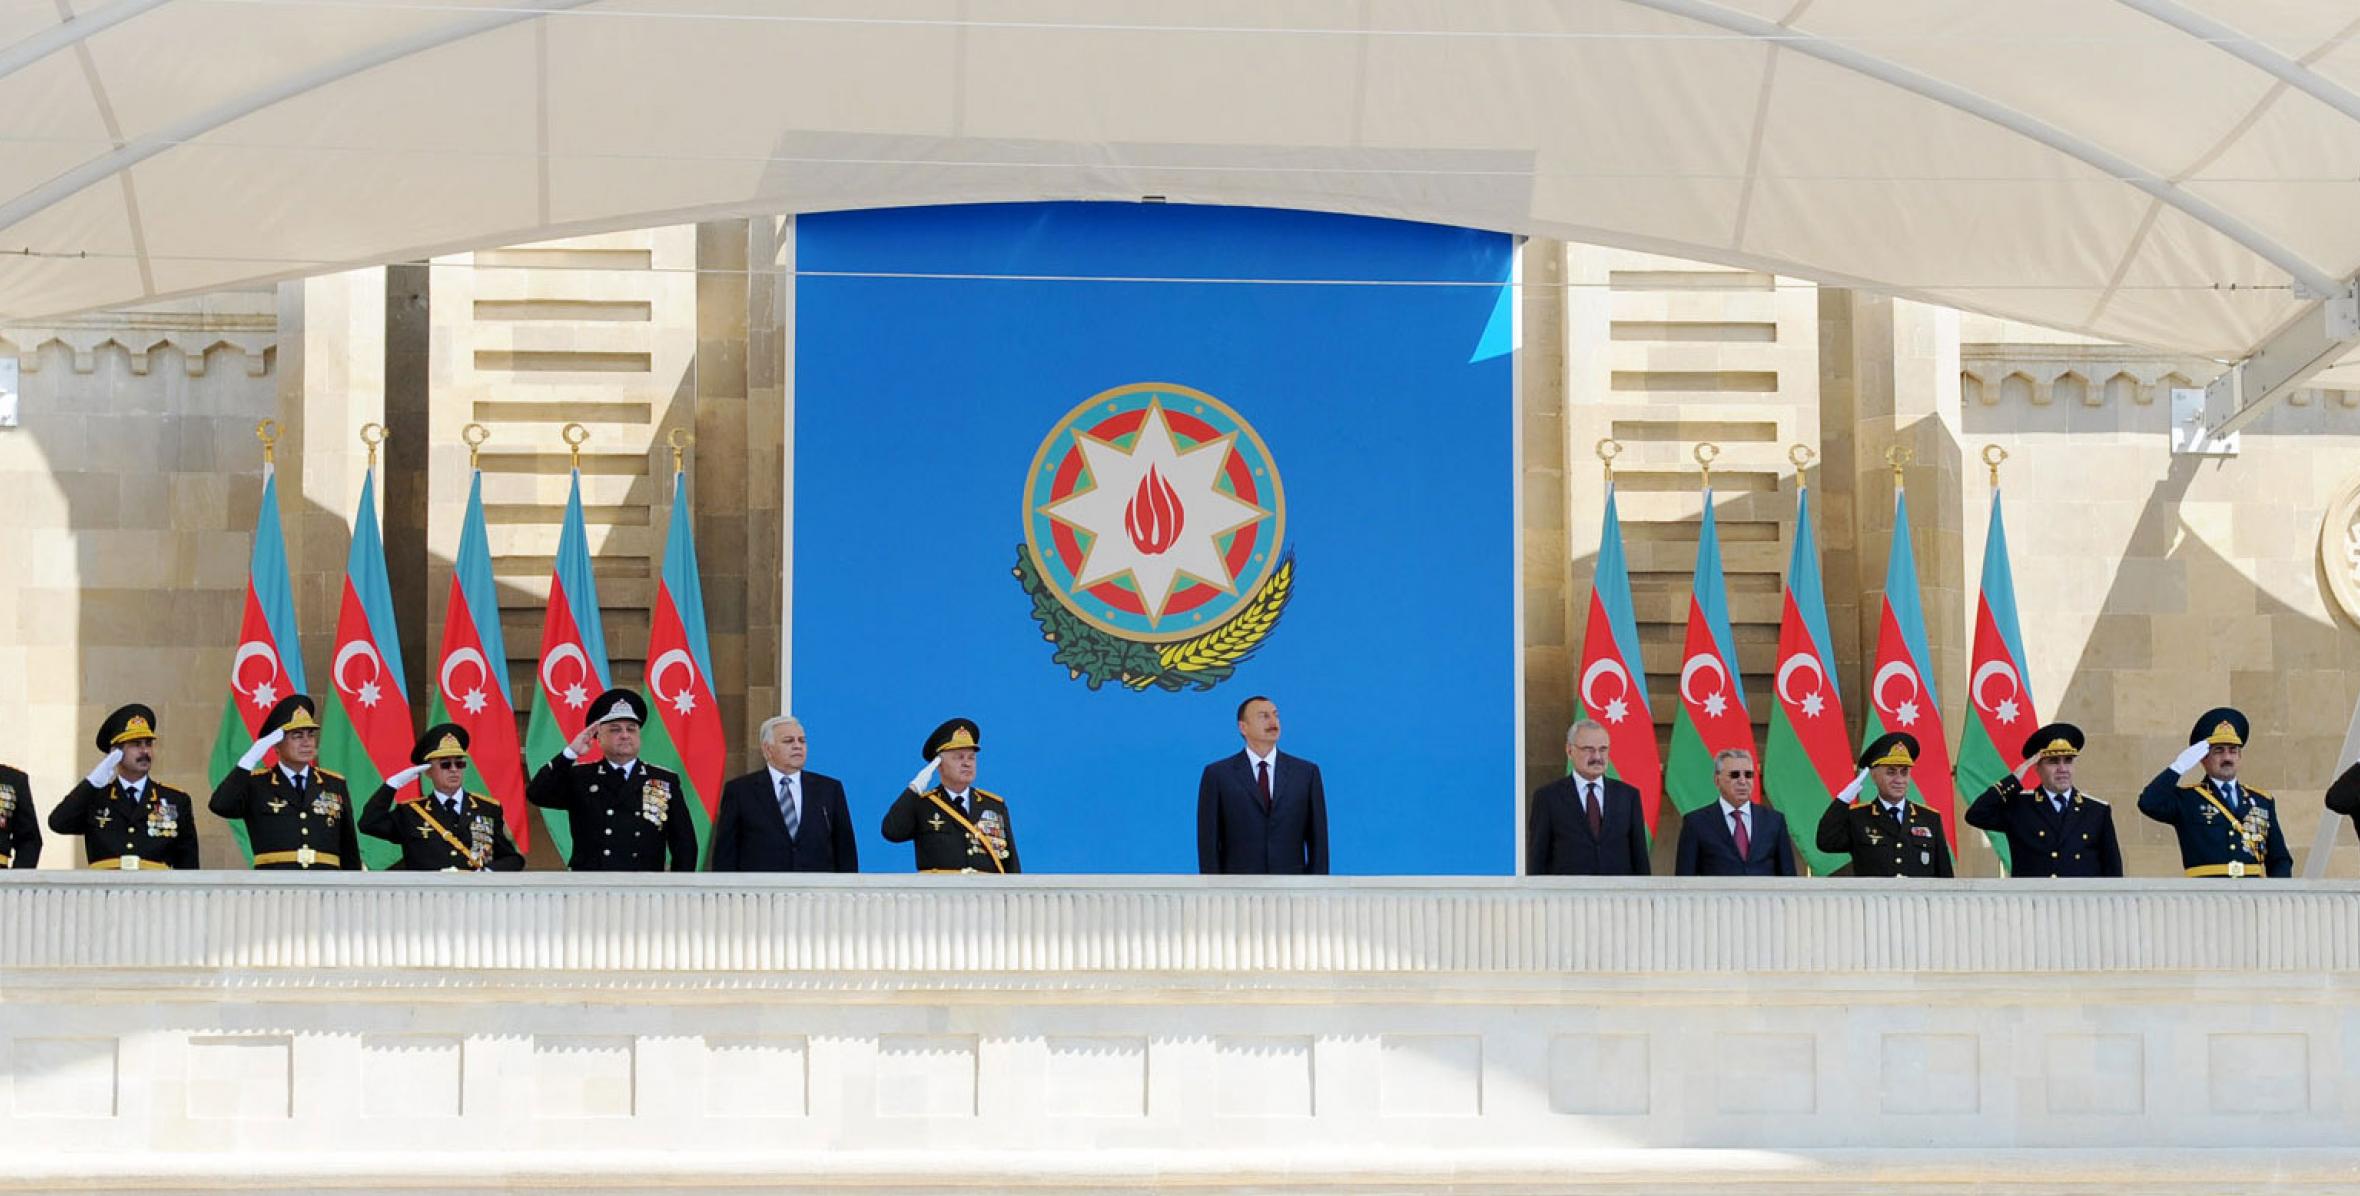 Ilham Aliyev attended the grand military parade on the occasion of the 93rd anniversary of the Armed Forces